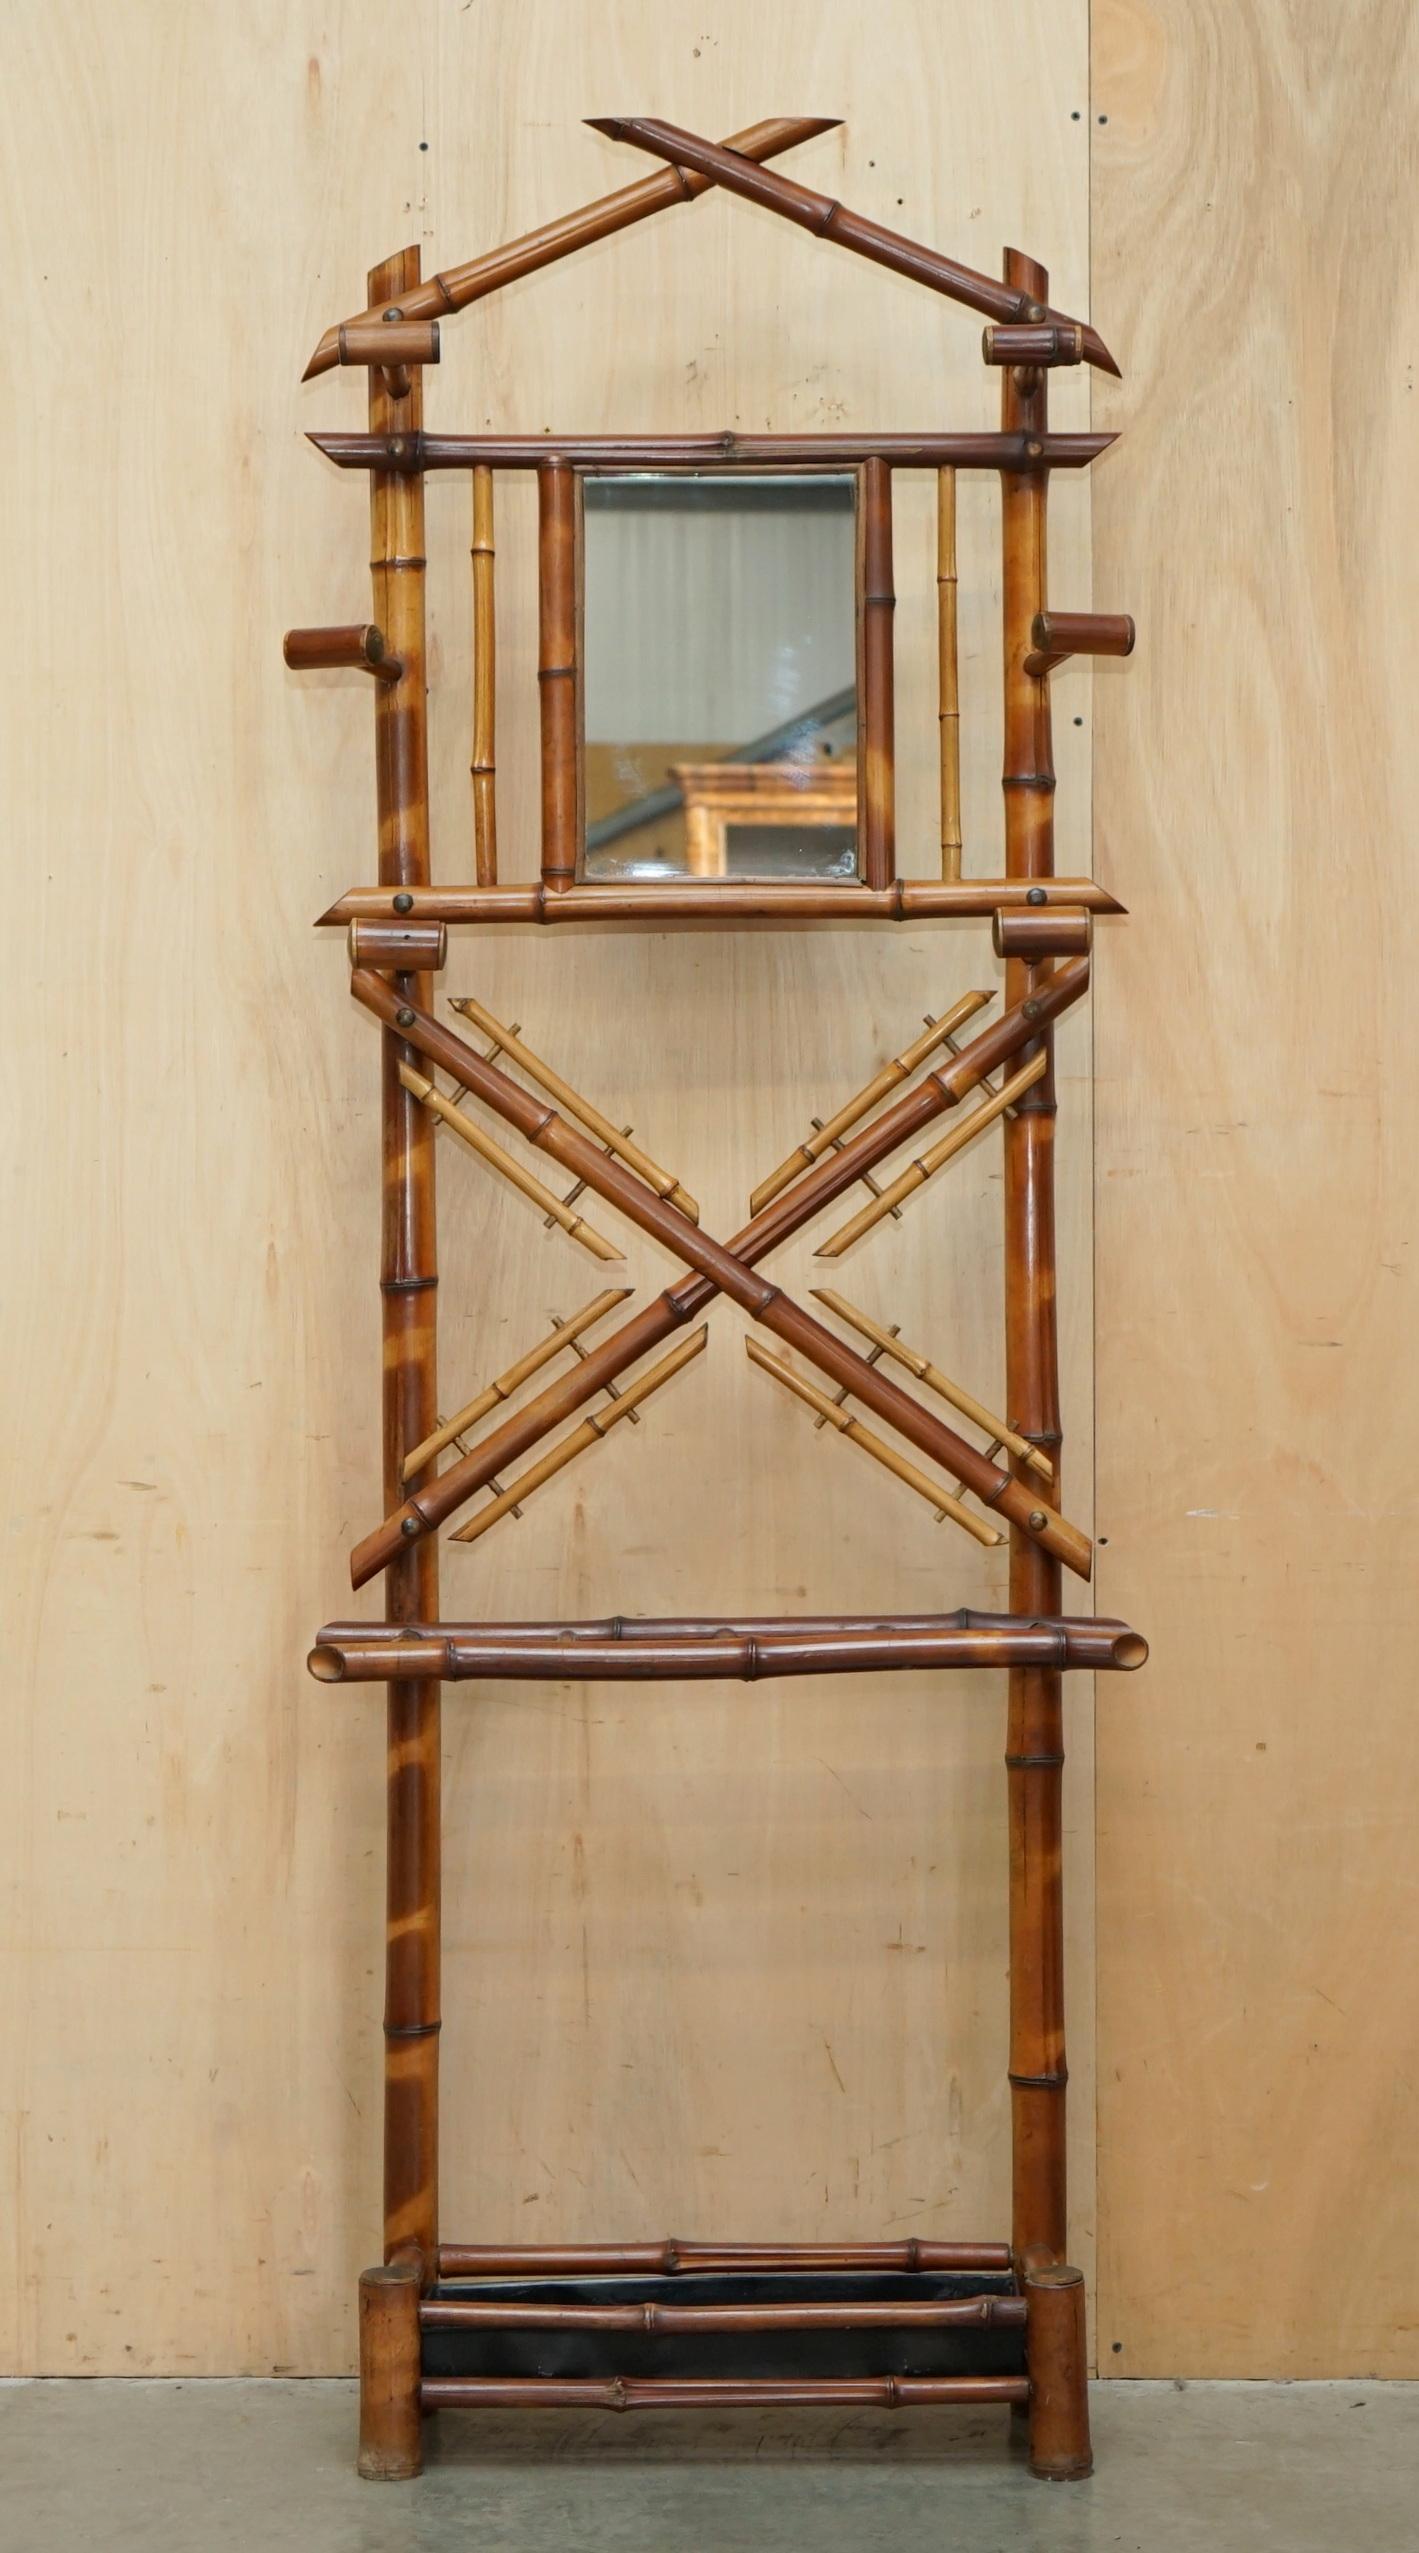 Royal House Antiques

Royal House Antiques is delighted to offer for sale this stunning original French Art Deco circa 1930's bamboo coat rack with central mirror

Please note the delivery fee listed is just a guide, it covers within the M25 only